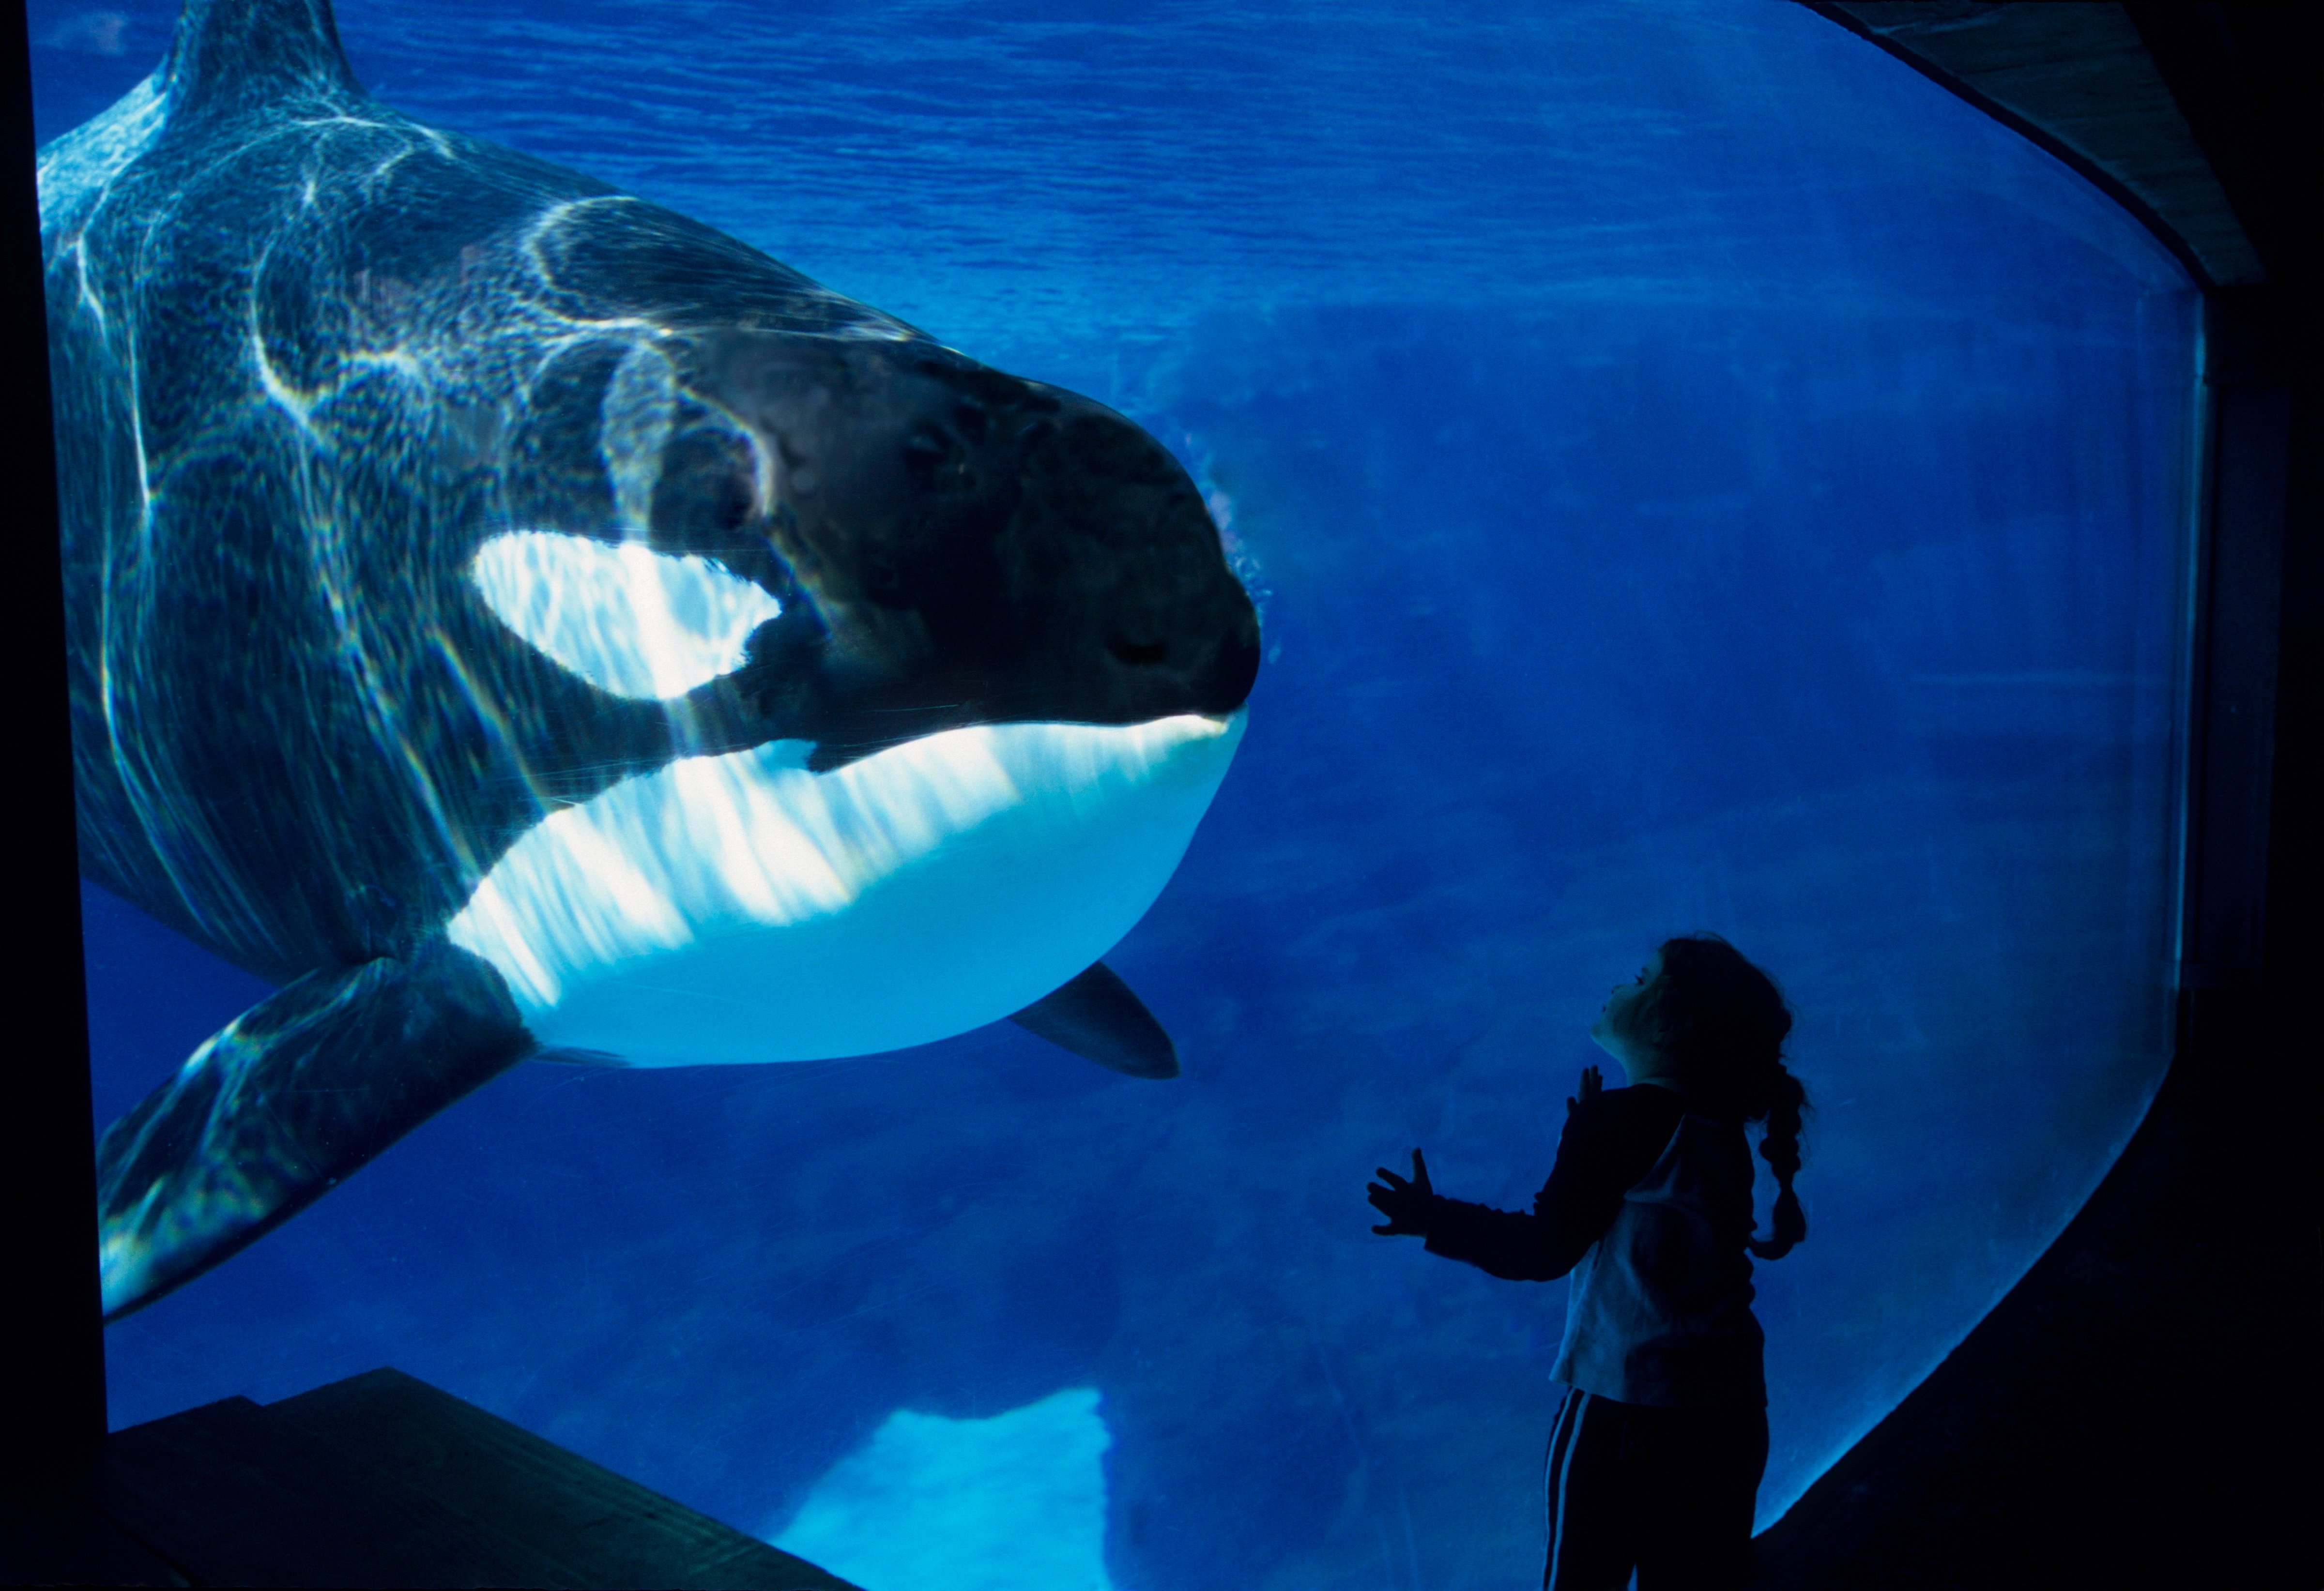 A killer whale (orca) at SeaWorld in San Diego. (Wolfgang Kaehler&mdash;LightRocket/Getty Images)